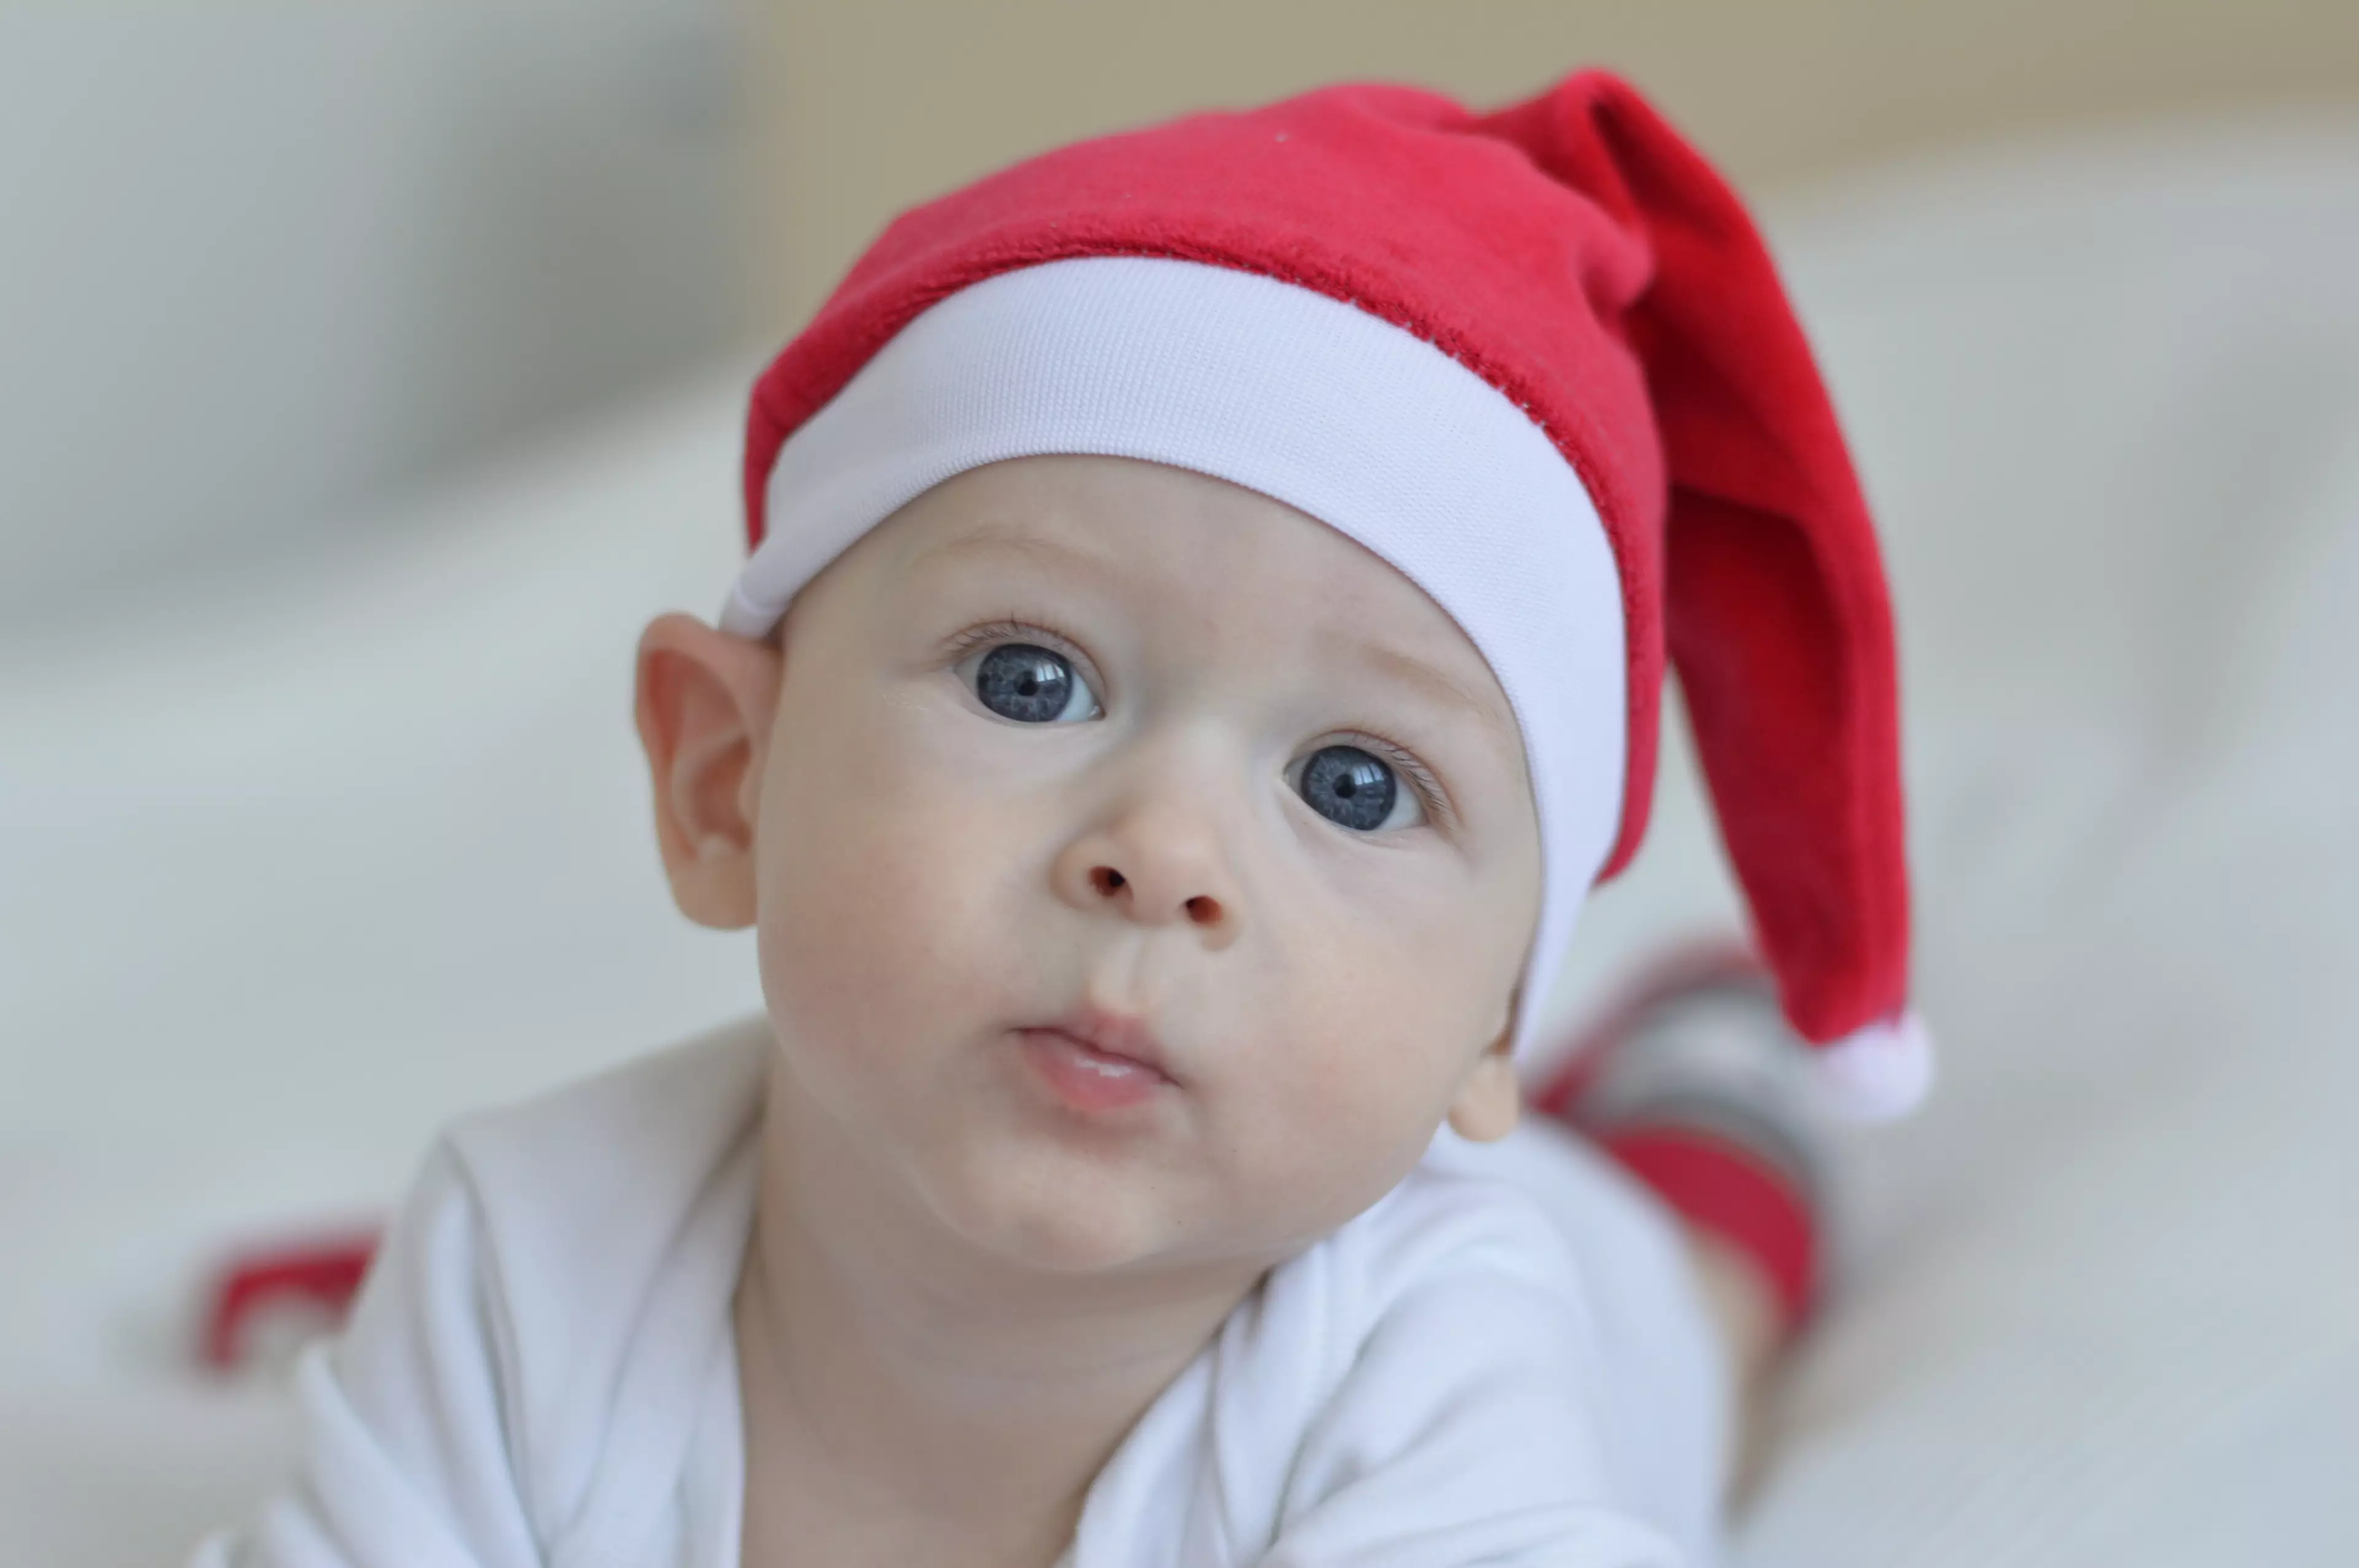 BabyCentre have compiled a list of baby names they think will be on each of Santa's lists this year (